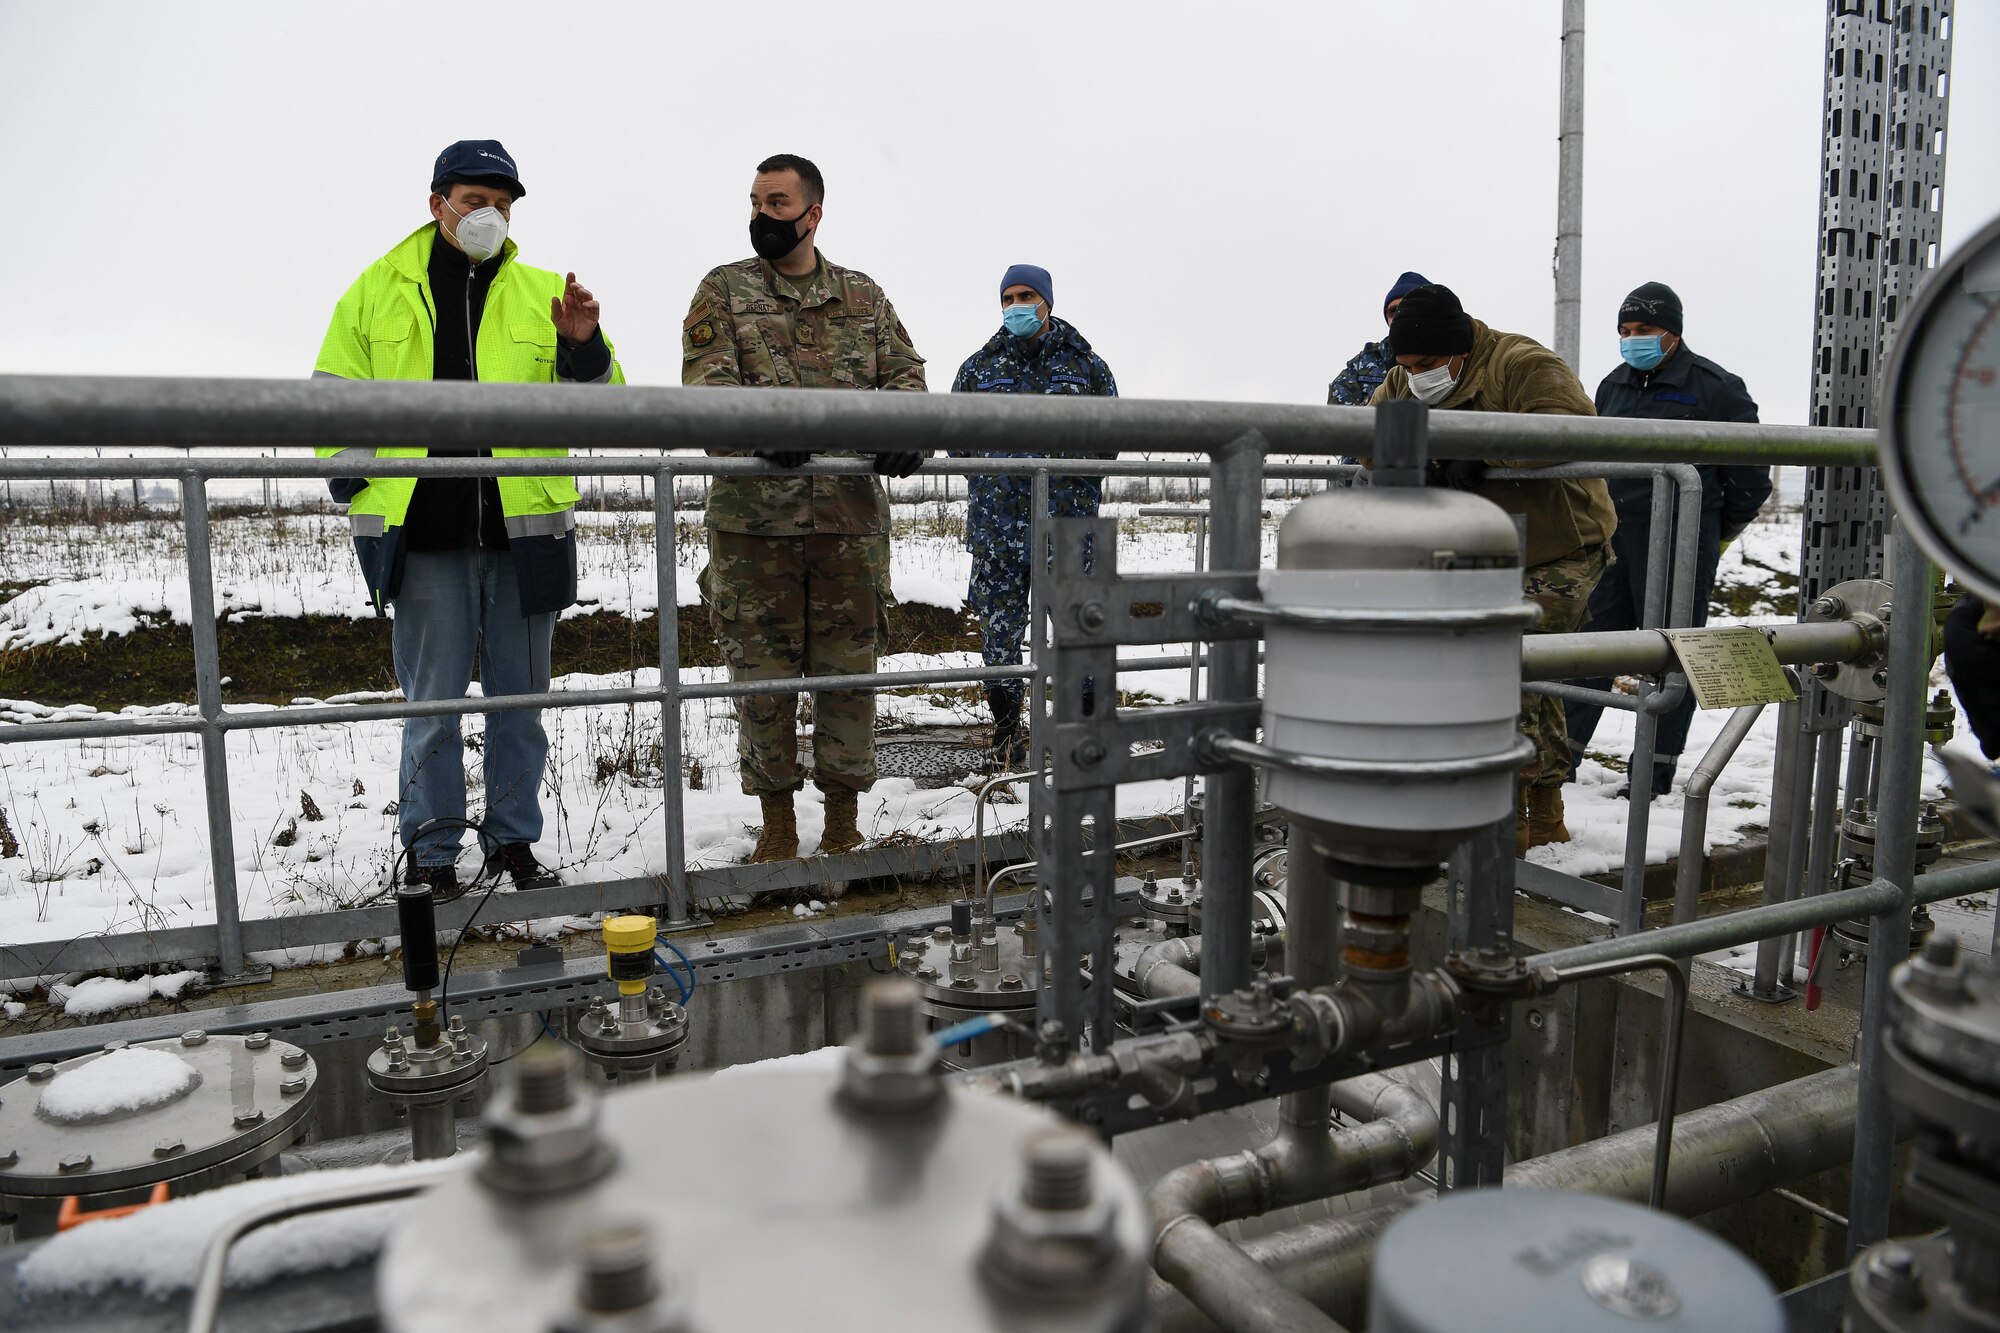 U.S. Airmen deployed here worked alongside their Romanian civil engineer counterparts to establish a diesel fuel farm, using fuels mobility support equipment in order to support various base operations.